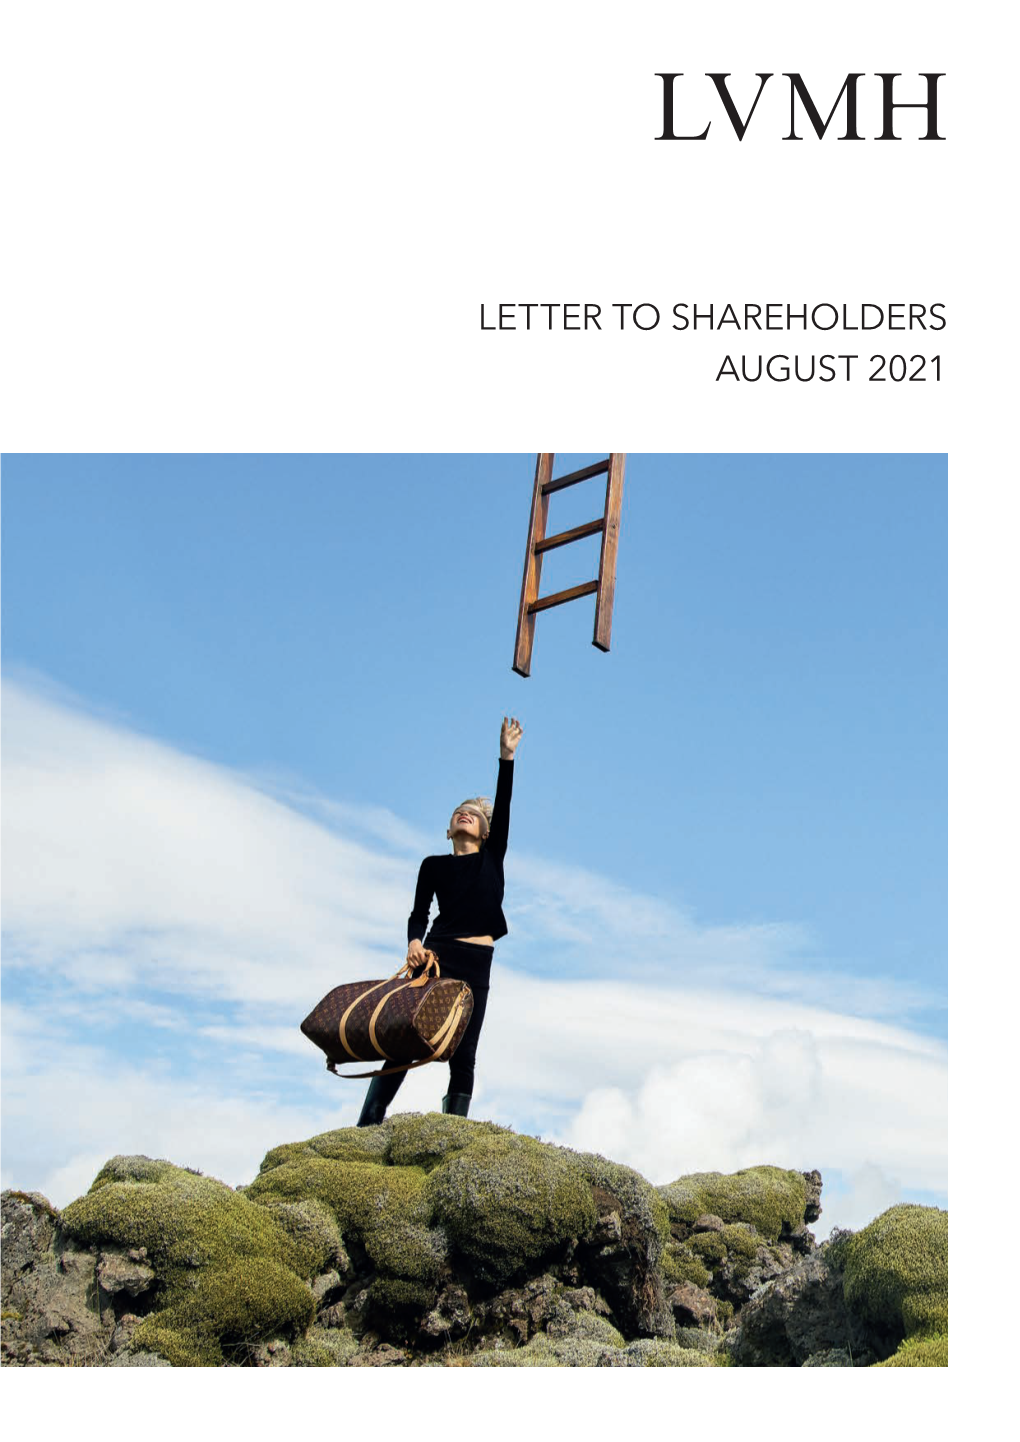 Letter to Shareholders August 2021 Lvmh Delivers Record First Half Performance